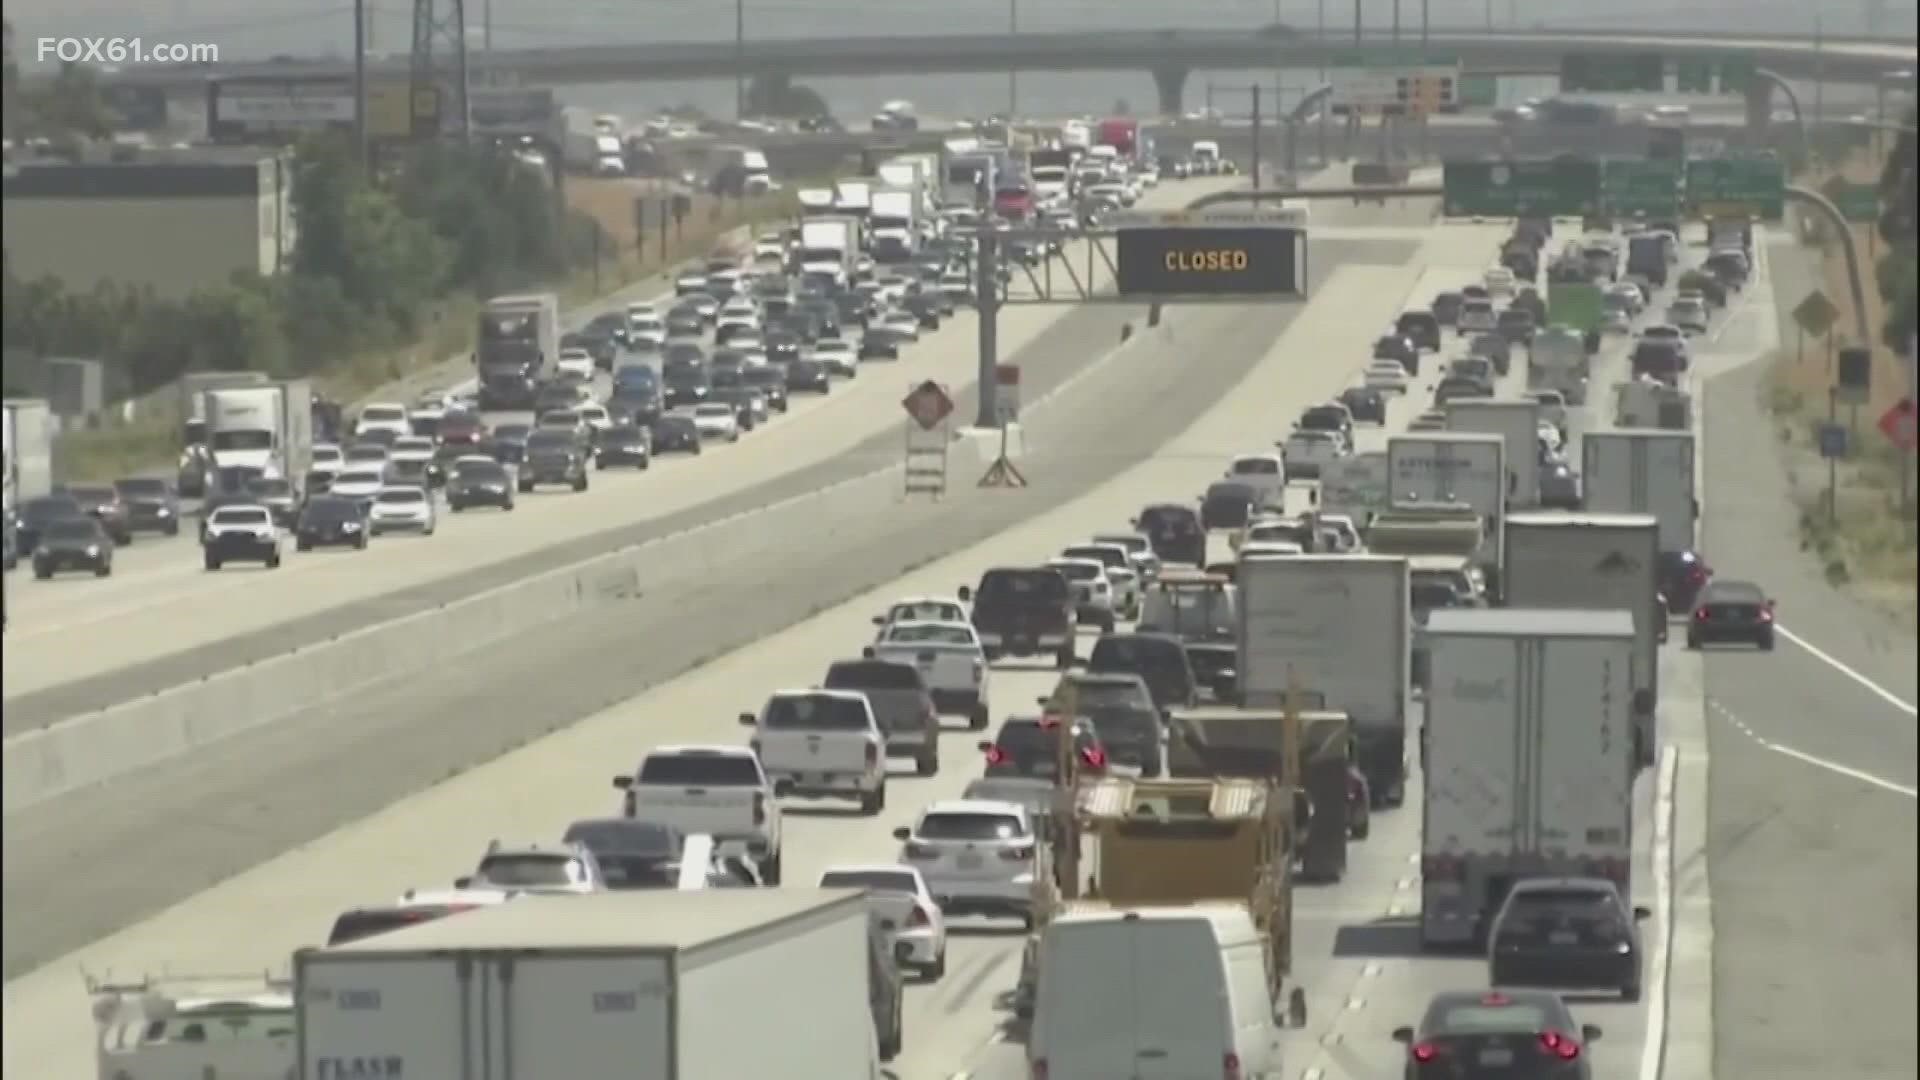 The period between Memorial Day and Labor Day is known for an increase in traffic deaths.